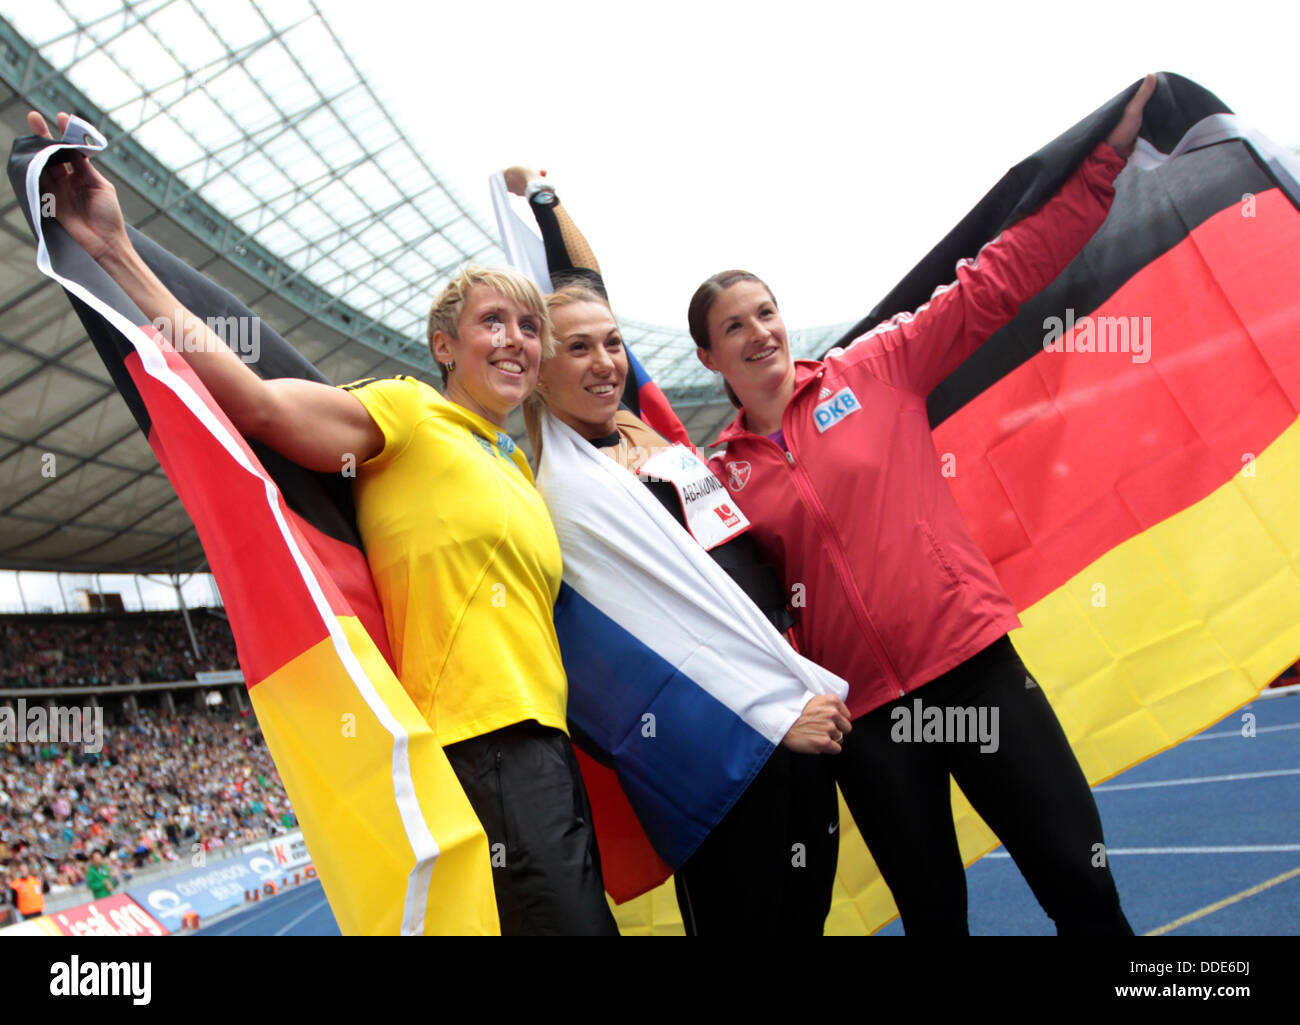 Third-placed Christina Obergfoell of Germany (L-R), winner Maria Abakumova of Russia and second-placed German Linda Stahl celebrate after the javelin throw competition of the international athletics meet ISTAF at Olympiastadion in Berlin, Germany, 01 September 2013.  Photo: MICHAEL KAPPELER Stock Photo